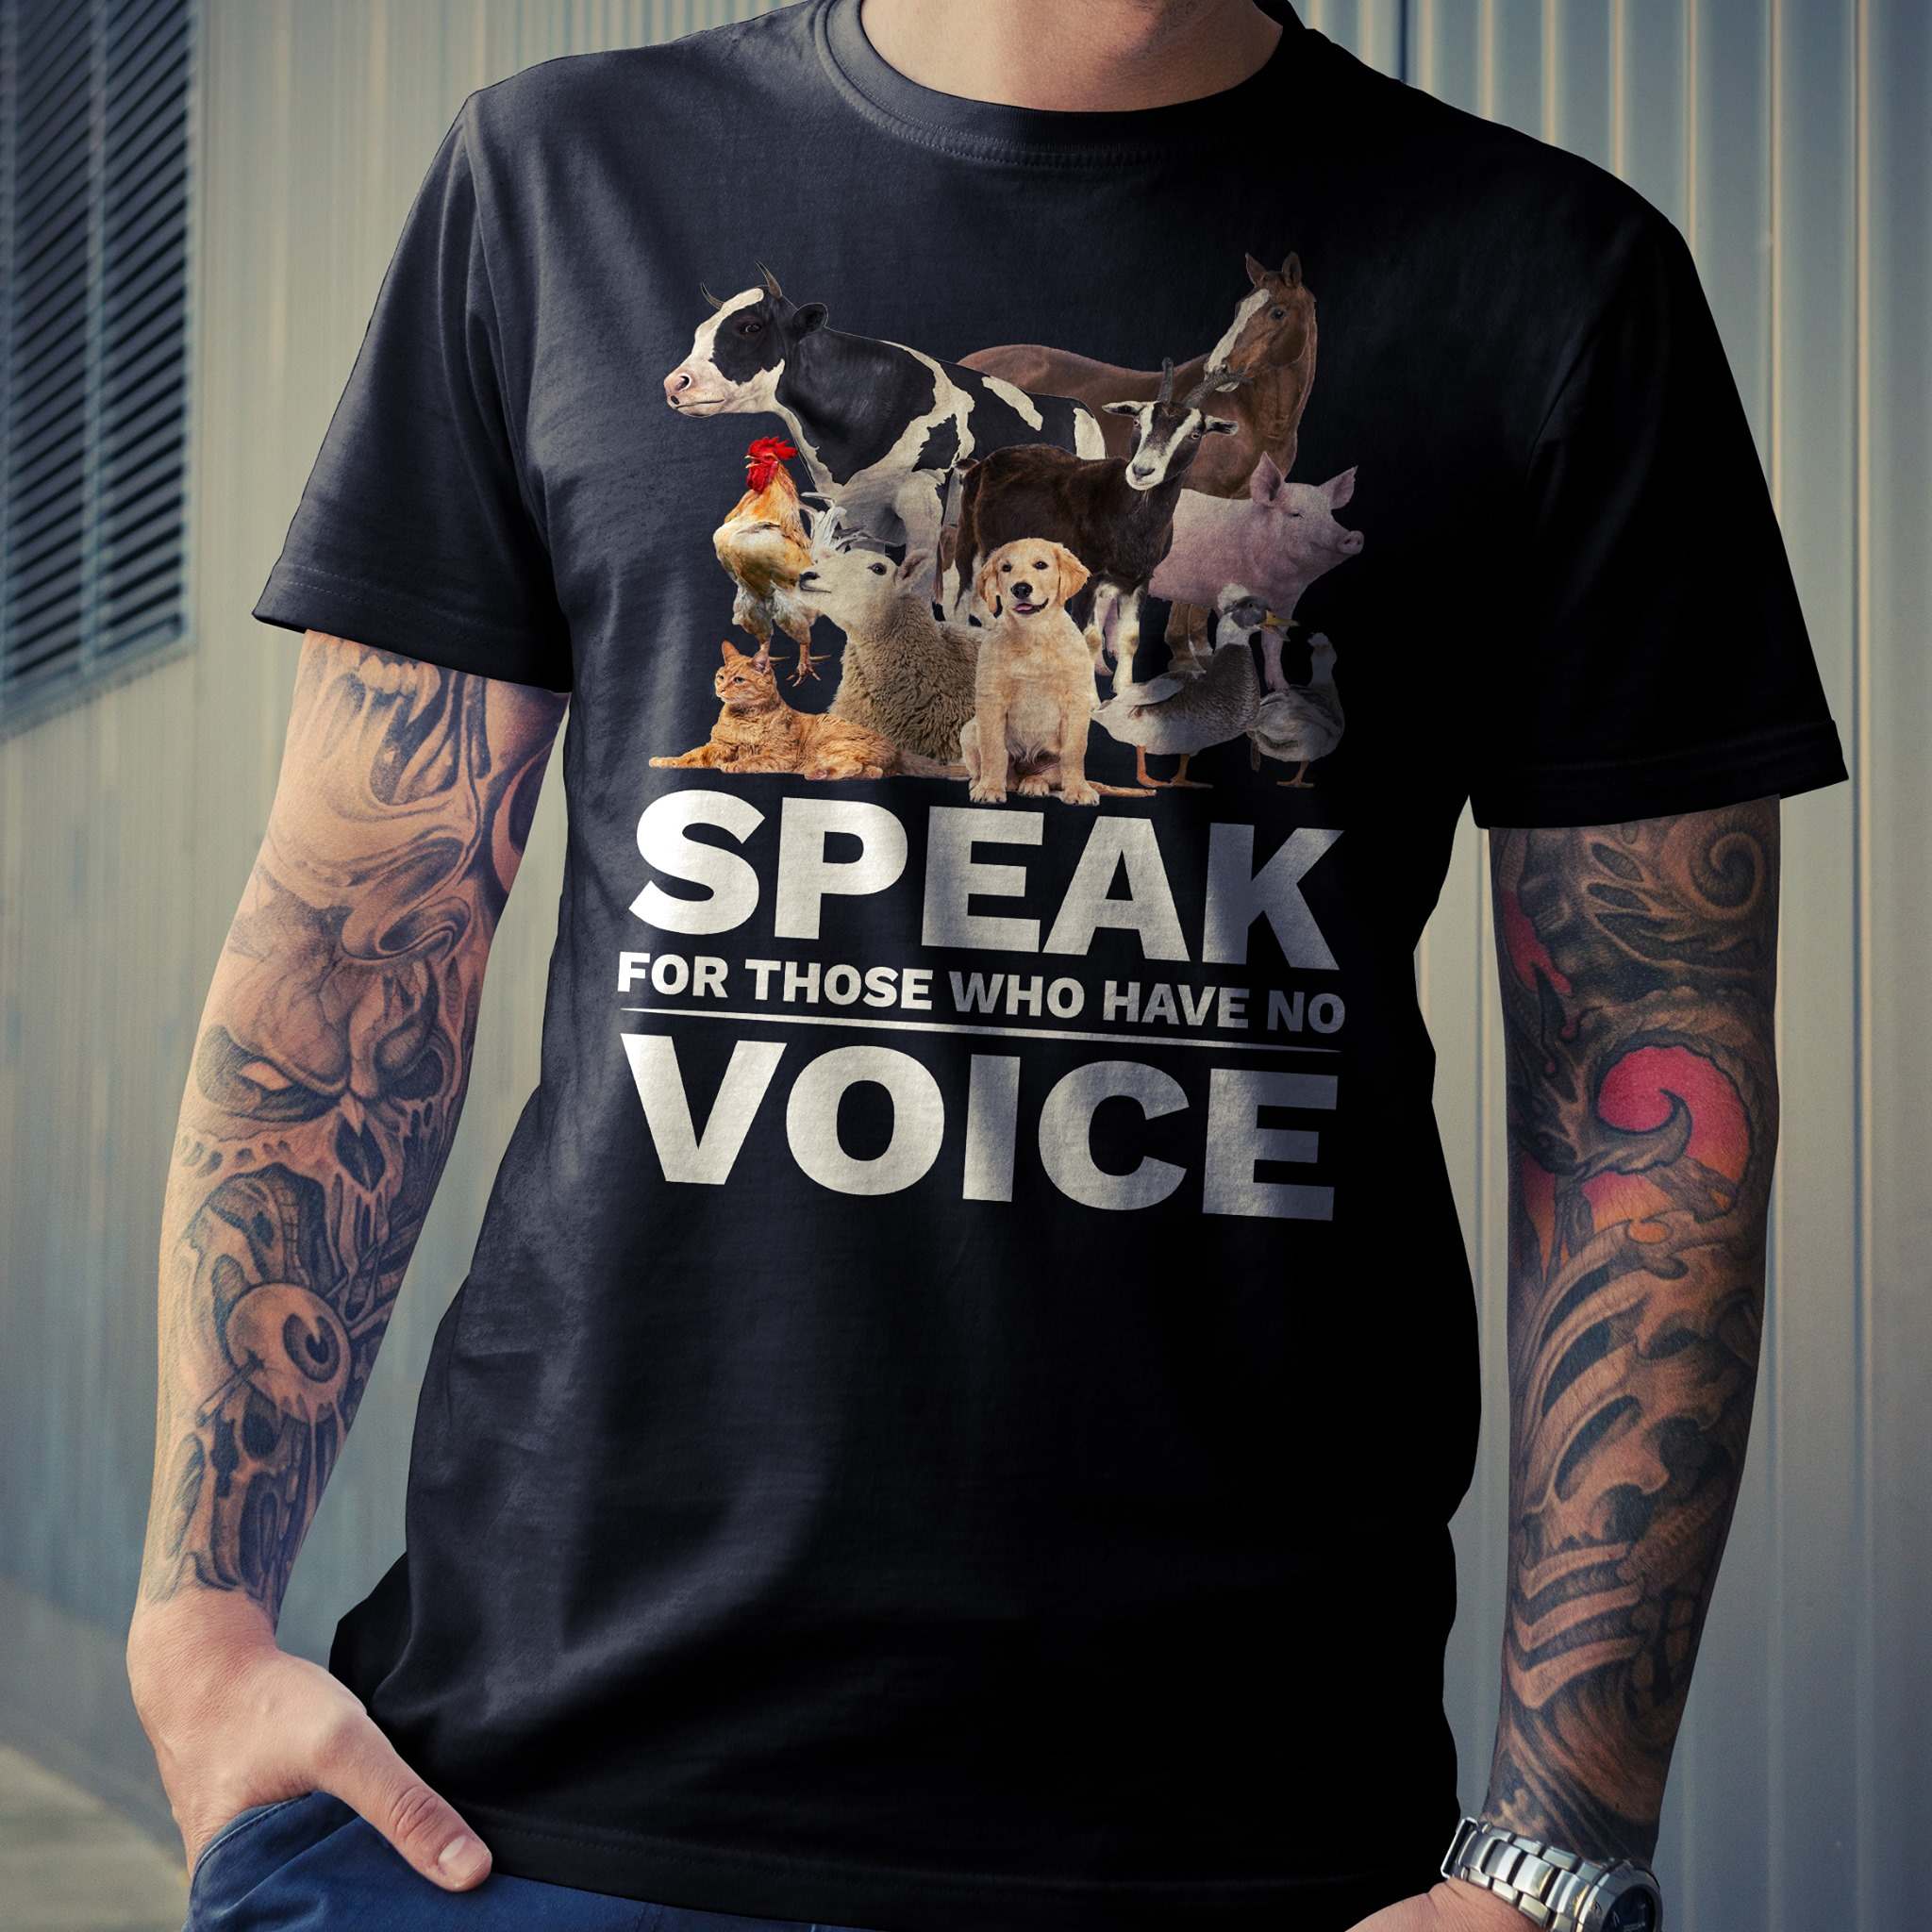 Speak for those who have no voice - Animal lover